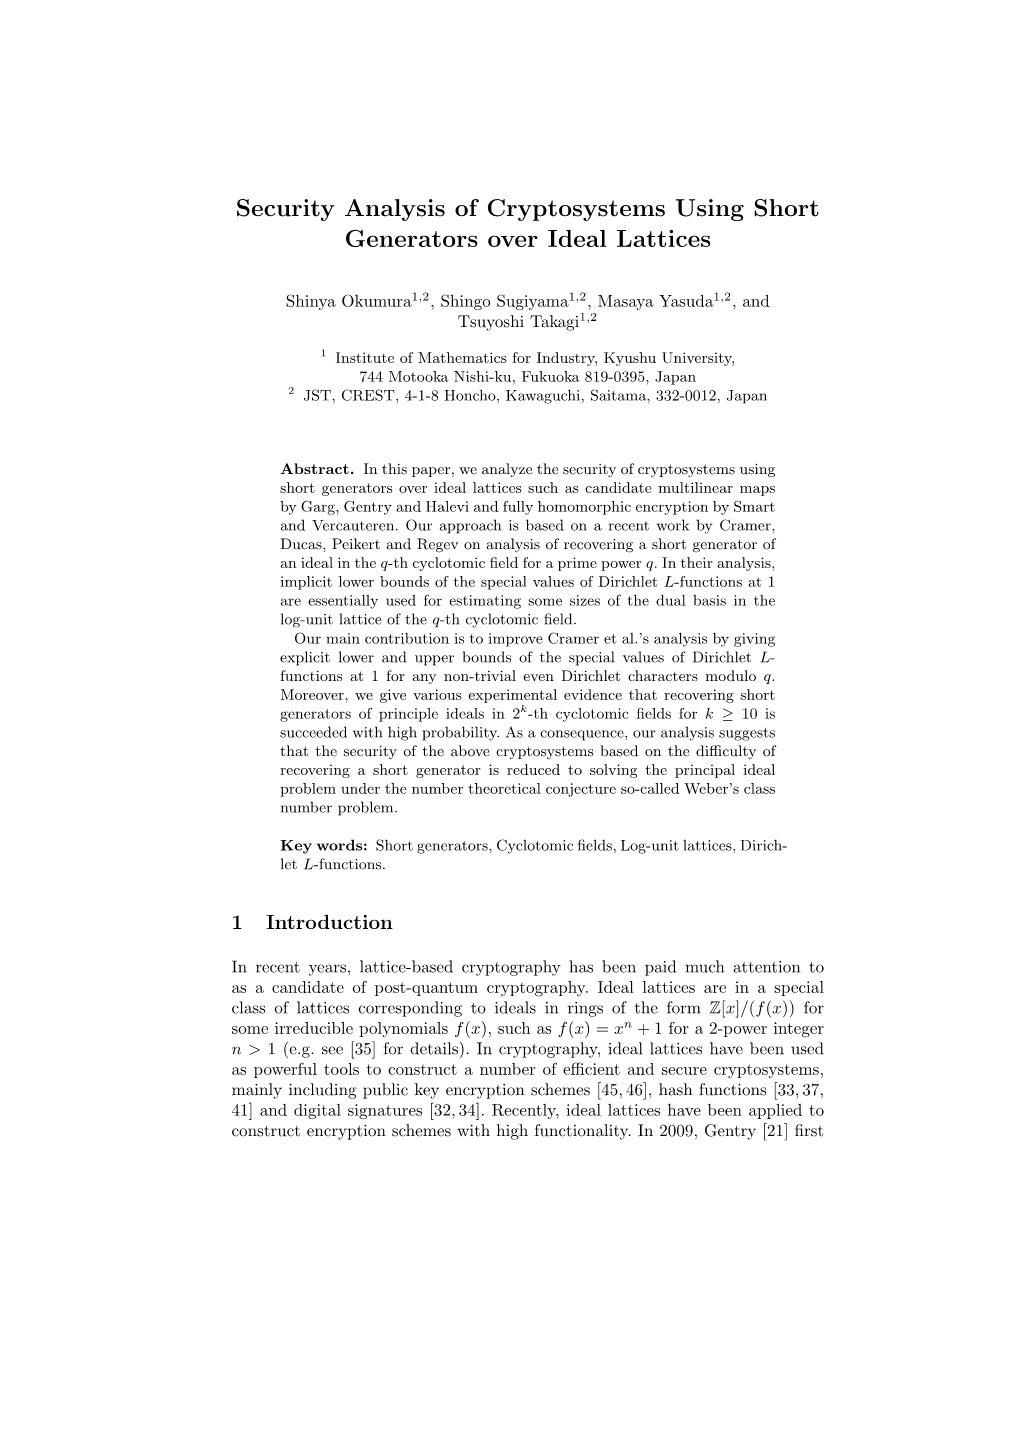 Security Analysis of Cryptosystems Using Short Generators Over Ideal Lattices